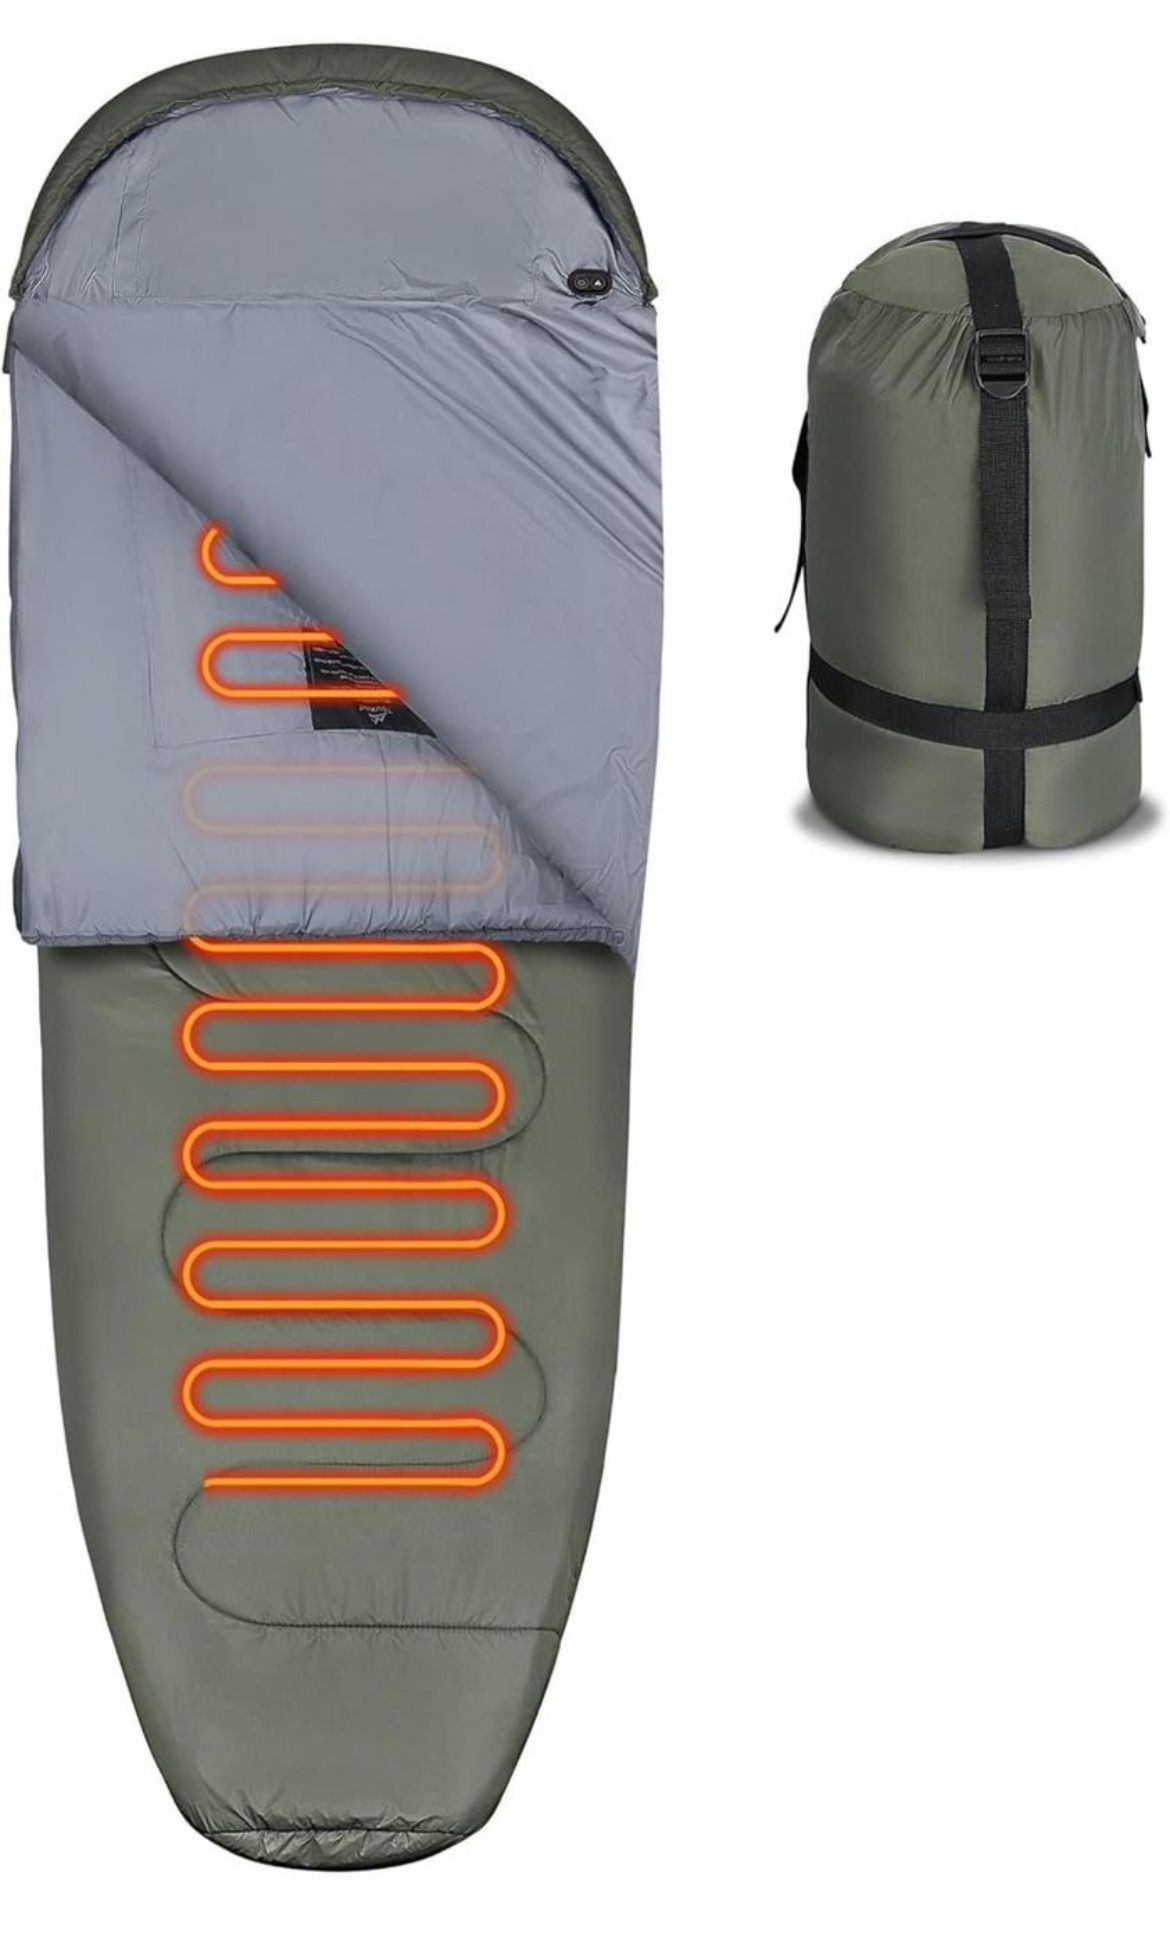 Adult Heated Sleeping Bag with 12V Battery